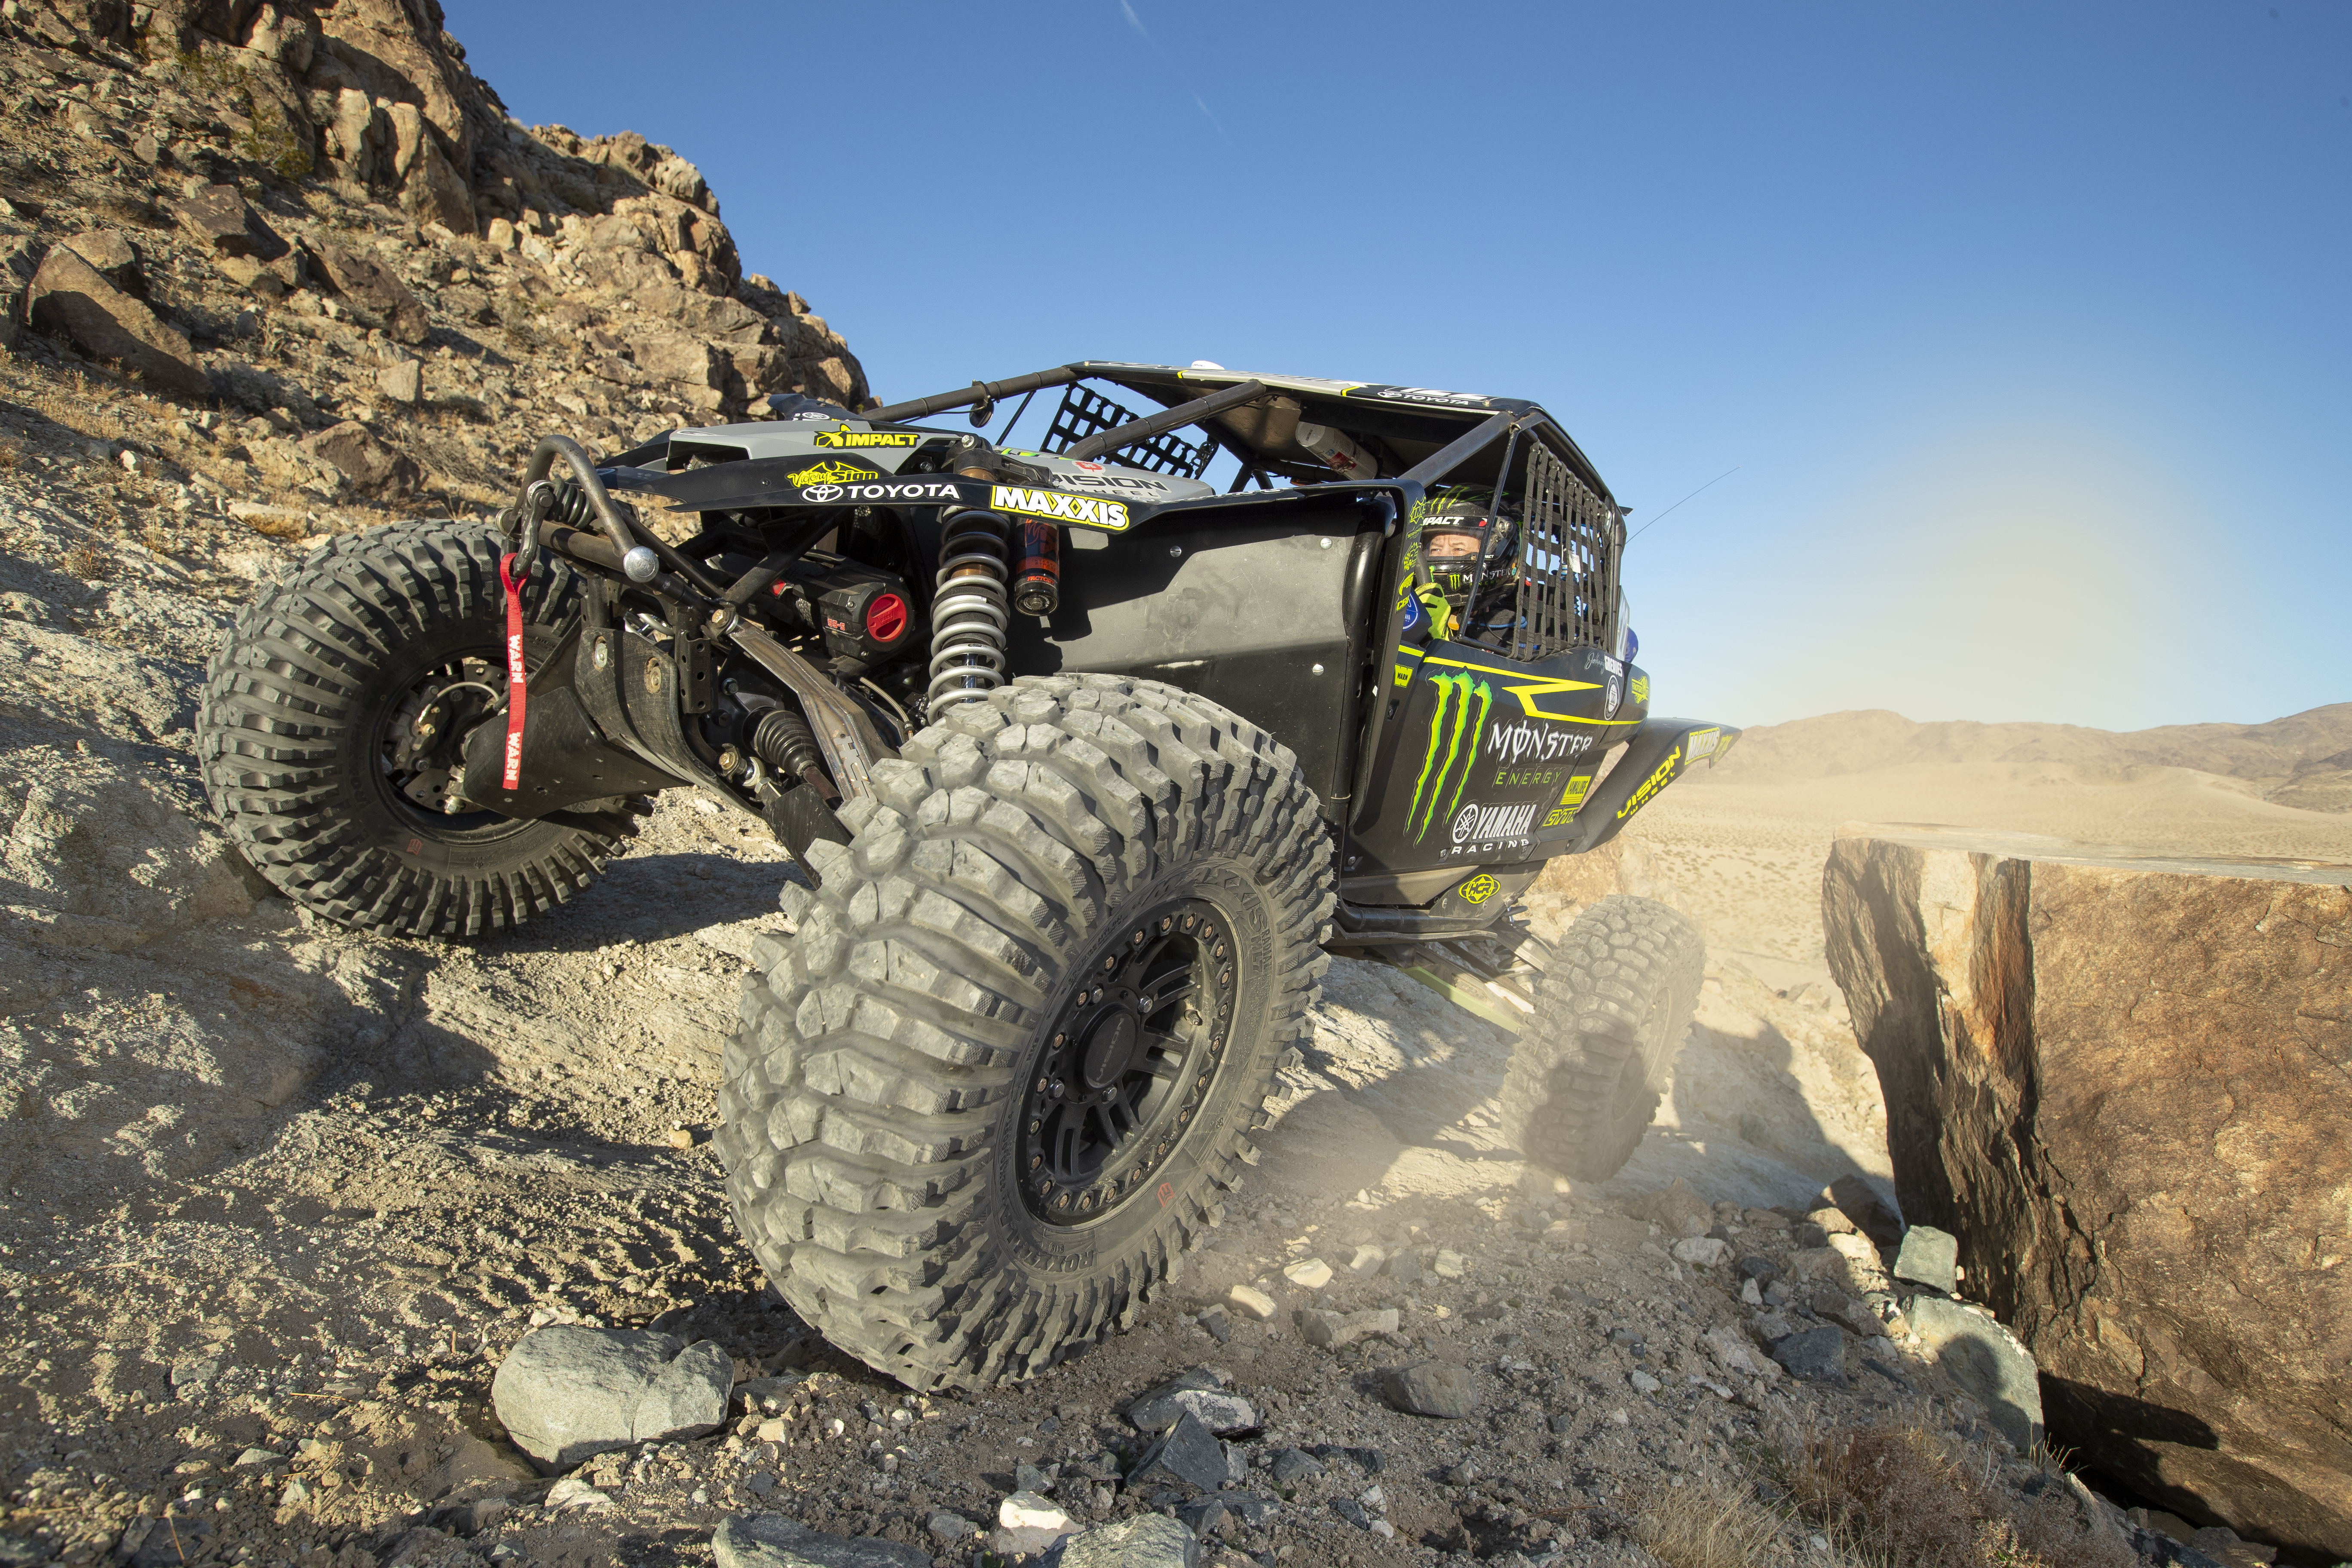 Johnny Greaves King of Hammers 2020